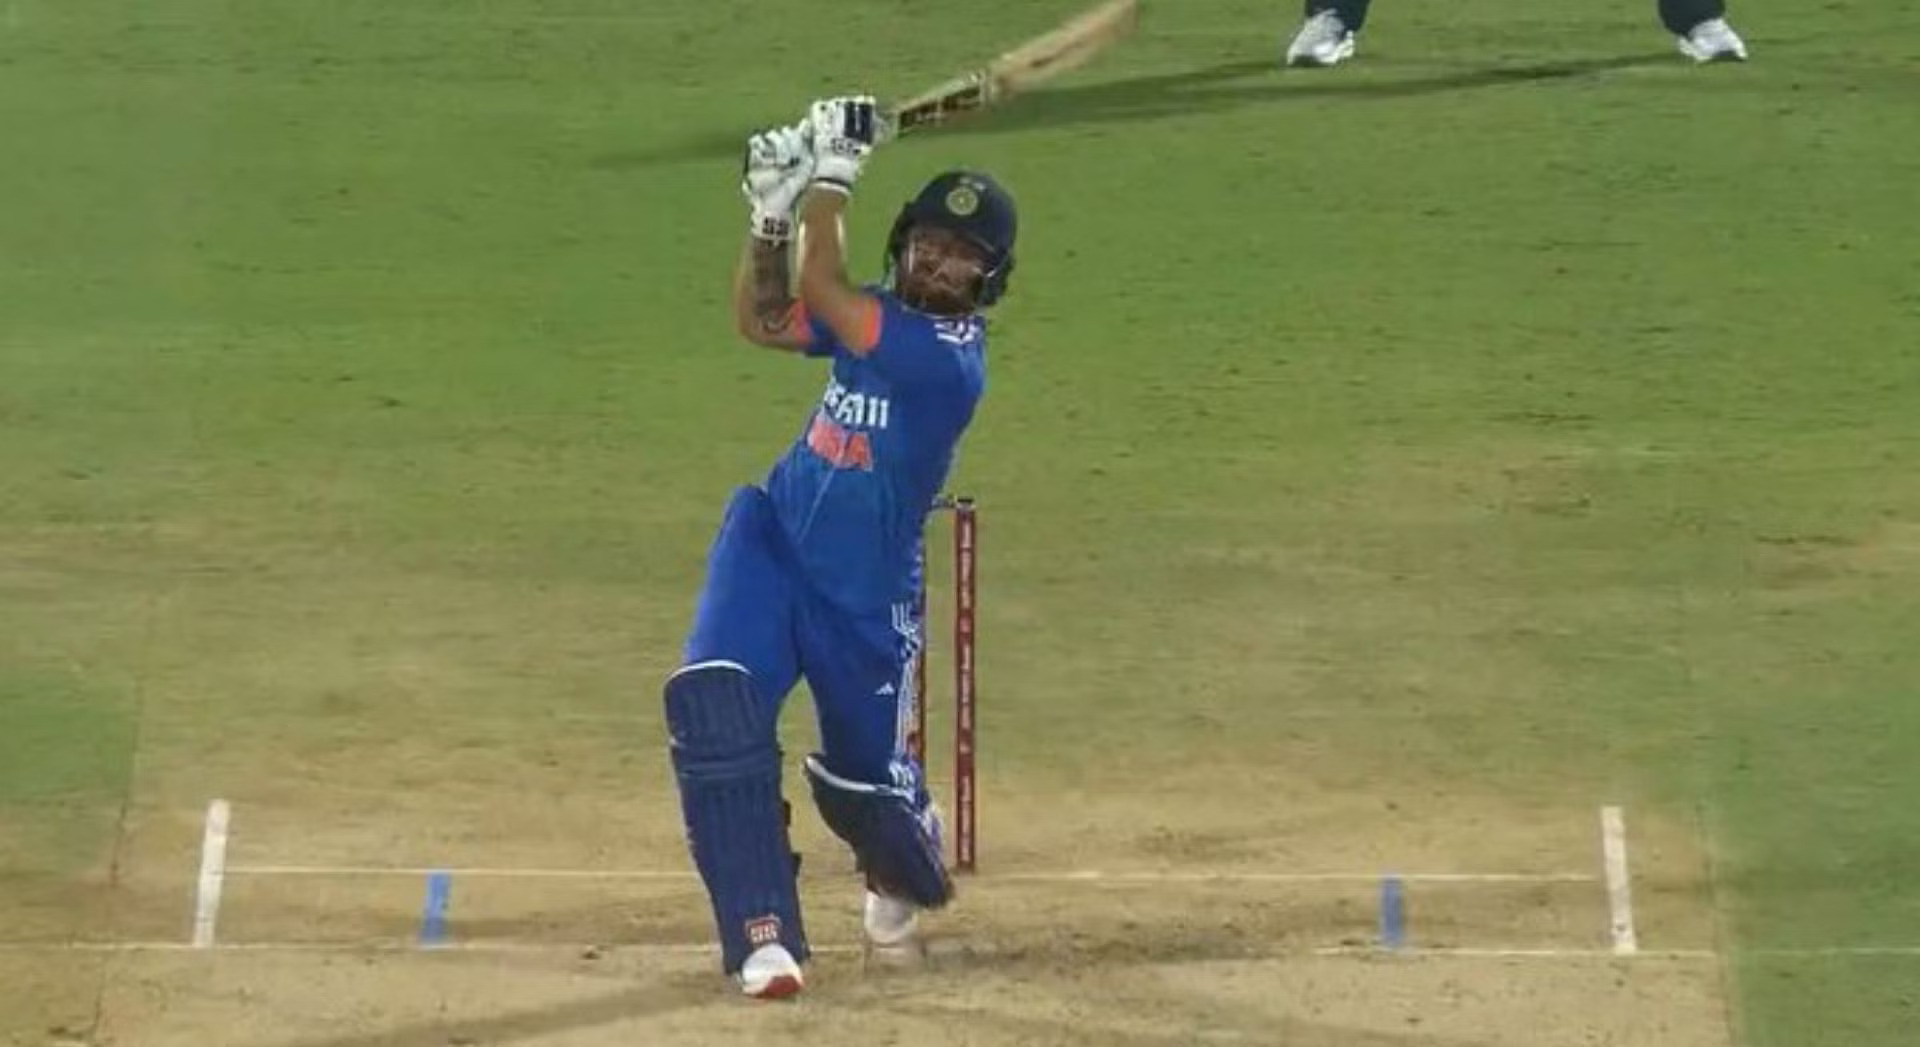 [Watch] Rinku Singh finishes it off in style in IND vs AUS 1st T20I